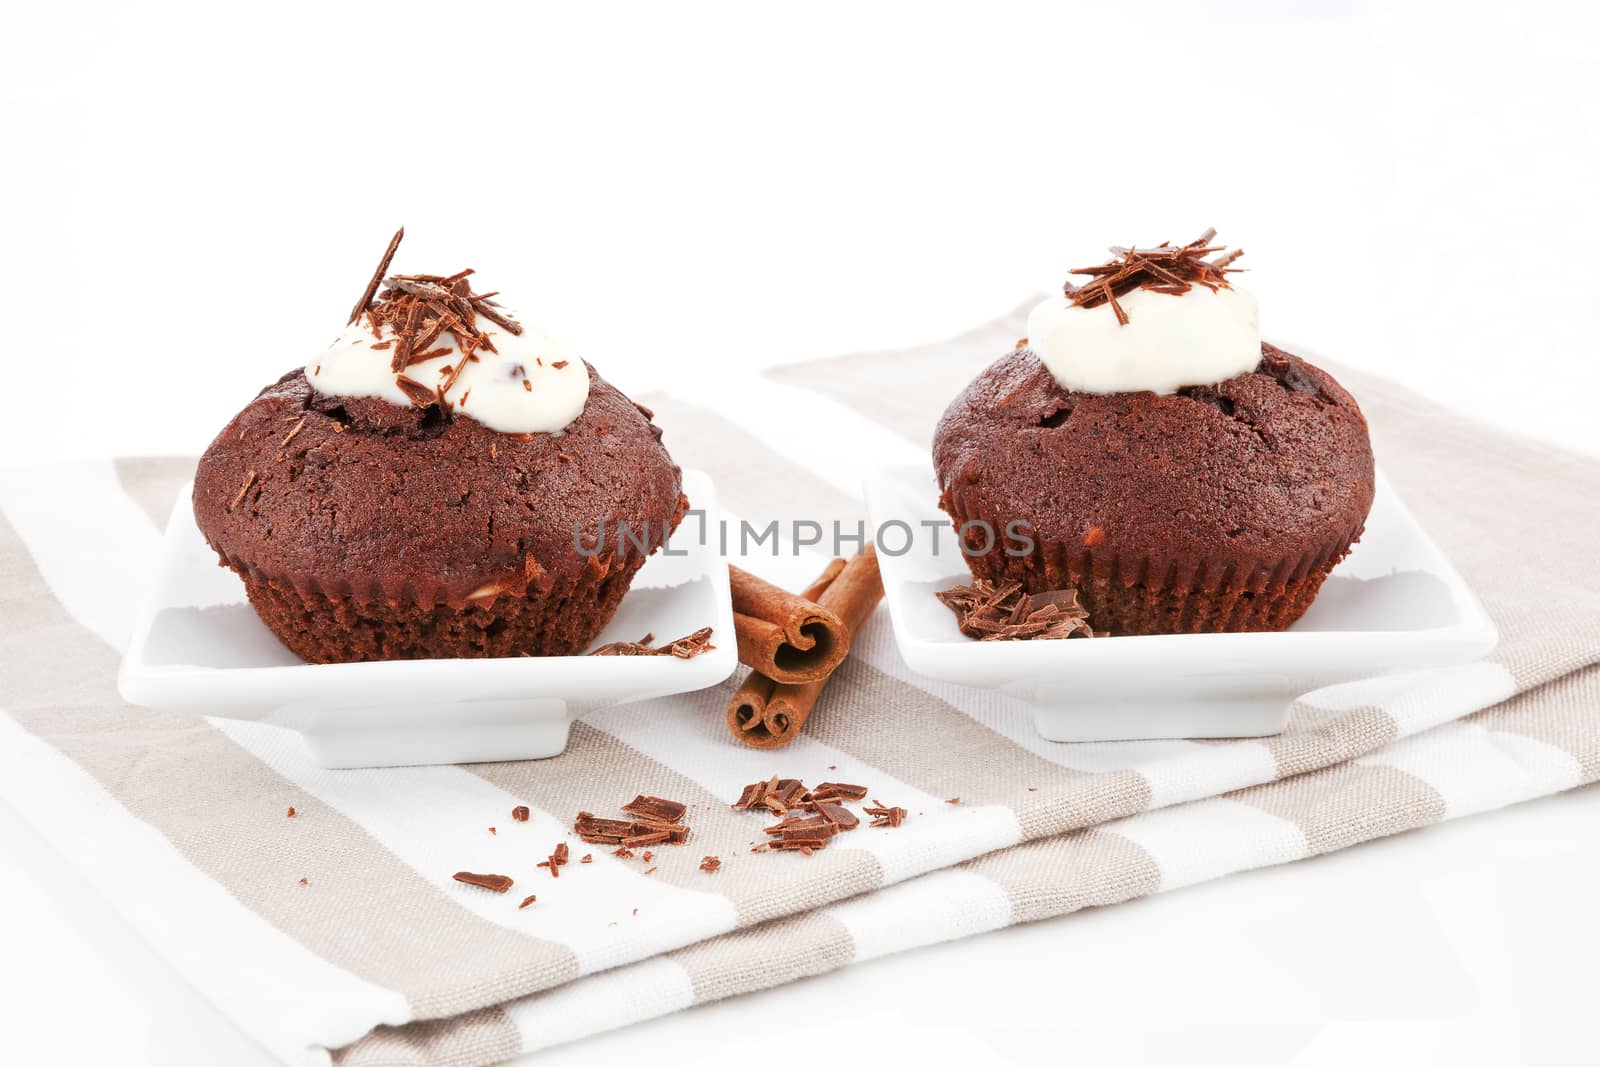 Two delicious mouthwatering chocolate muffins with cream and chocolate.